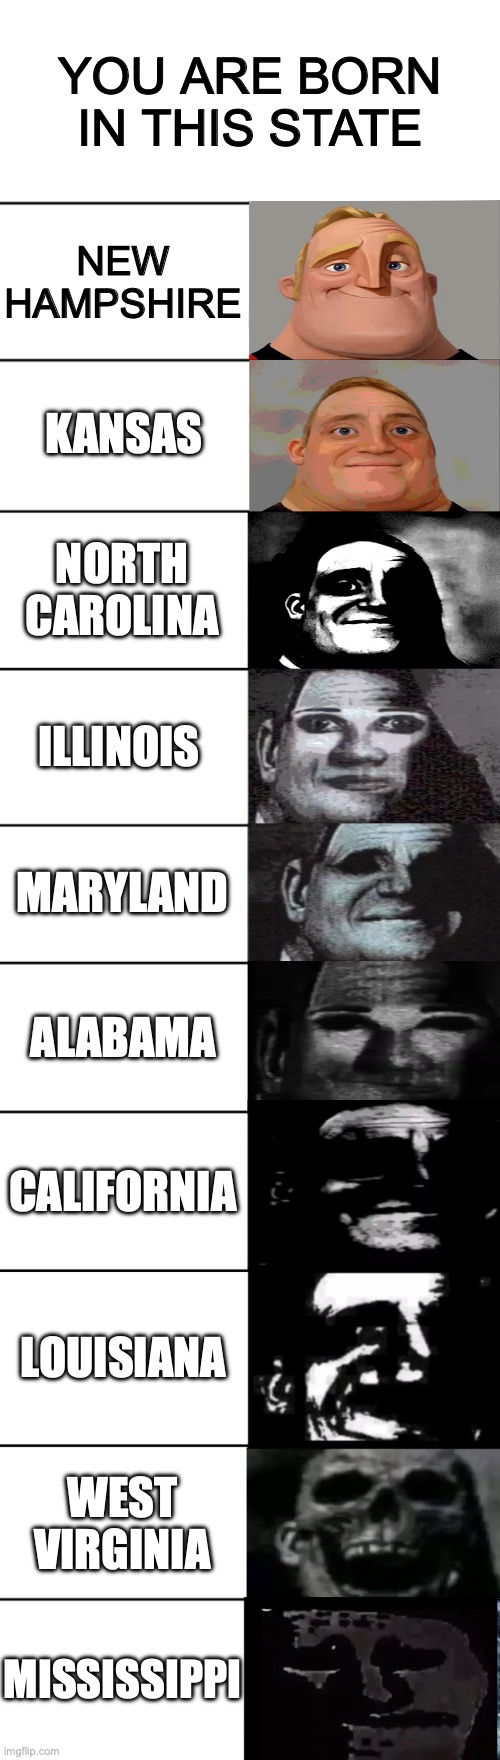 Mr. Incredible becoming uncanny | YOU ARE BORN IN THIS STATE; NEW HAMPSHIRE; KANSAS; NORTH CAROLINA; ILLINOIS; MARYLAND; ALABAMA; CALIFORNIA; LOUISIANA; WEST VIRGINIA; MISSISSIPPI | image tagged in mr incredible becoming uncanny | made w/ Imgflip meme maker